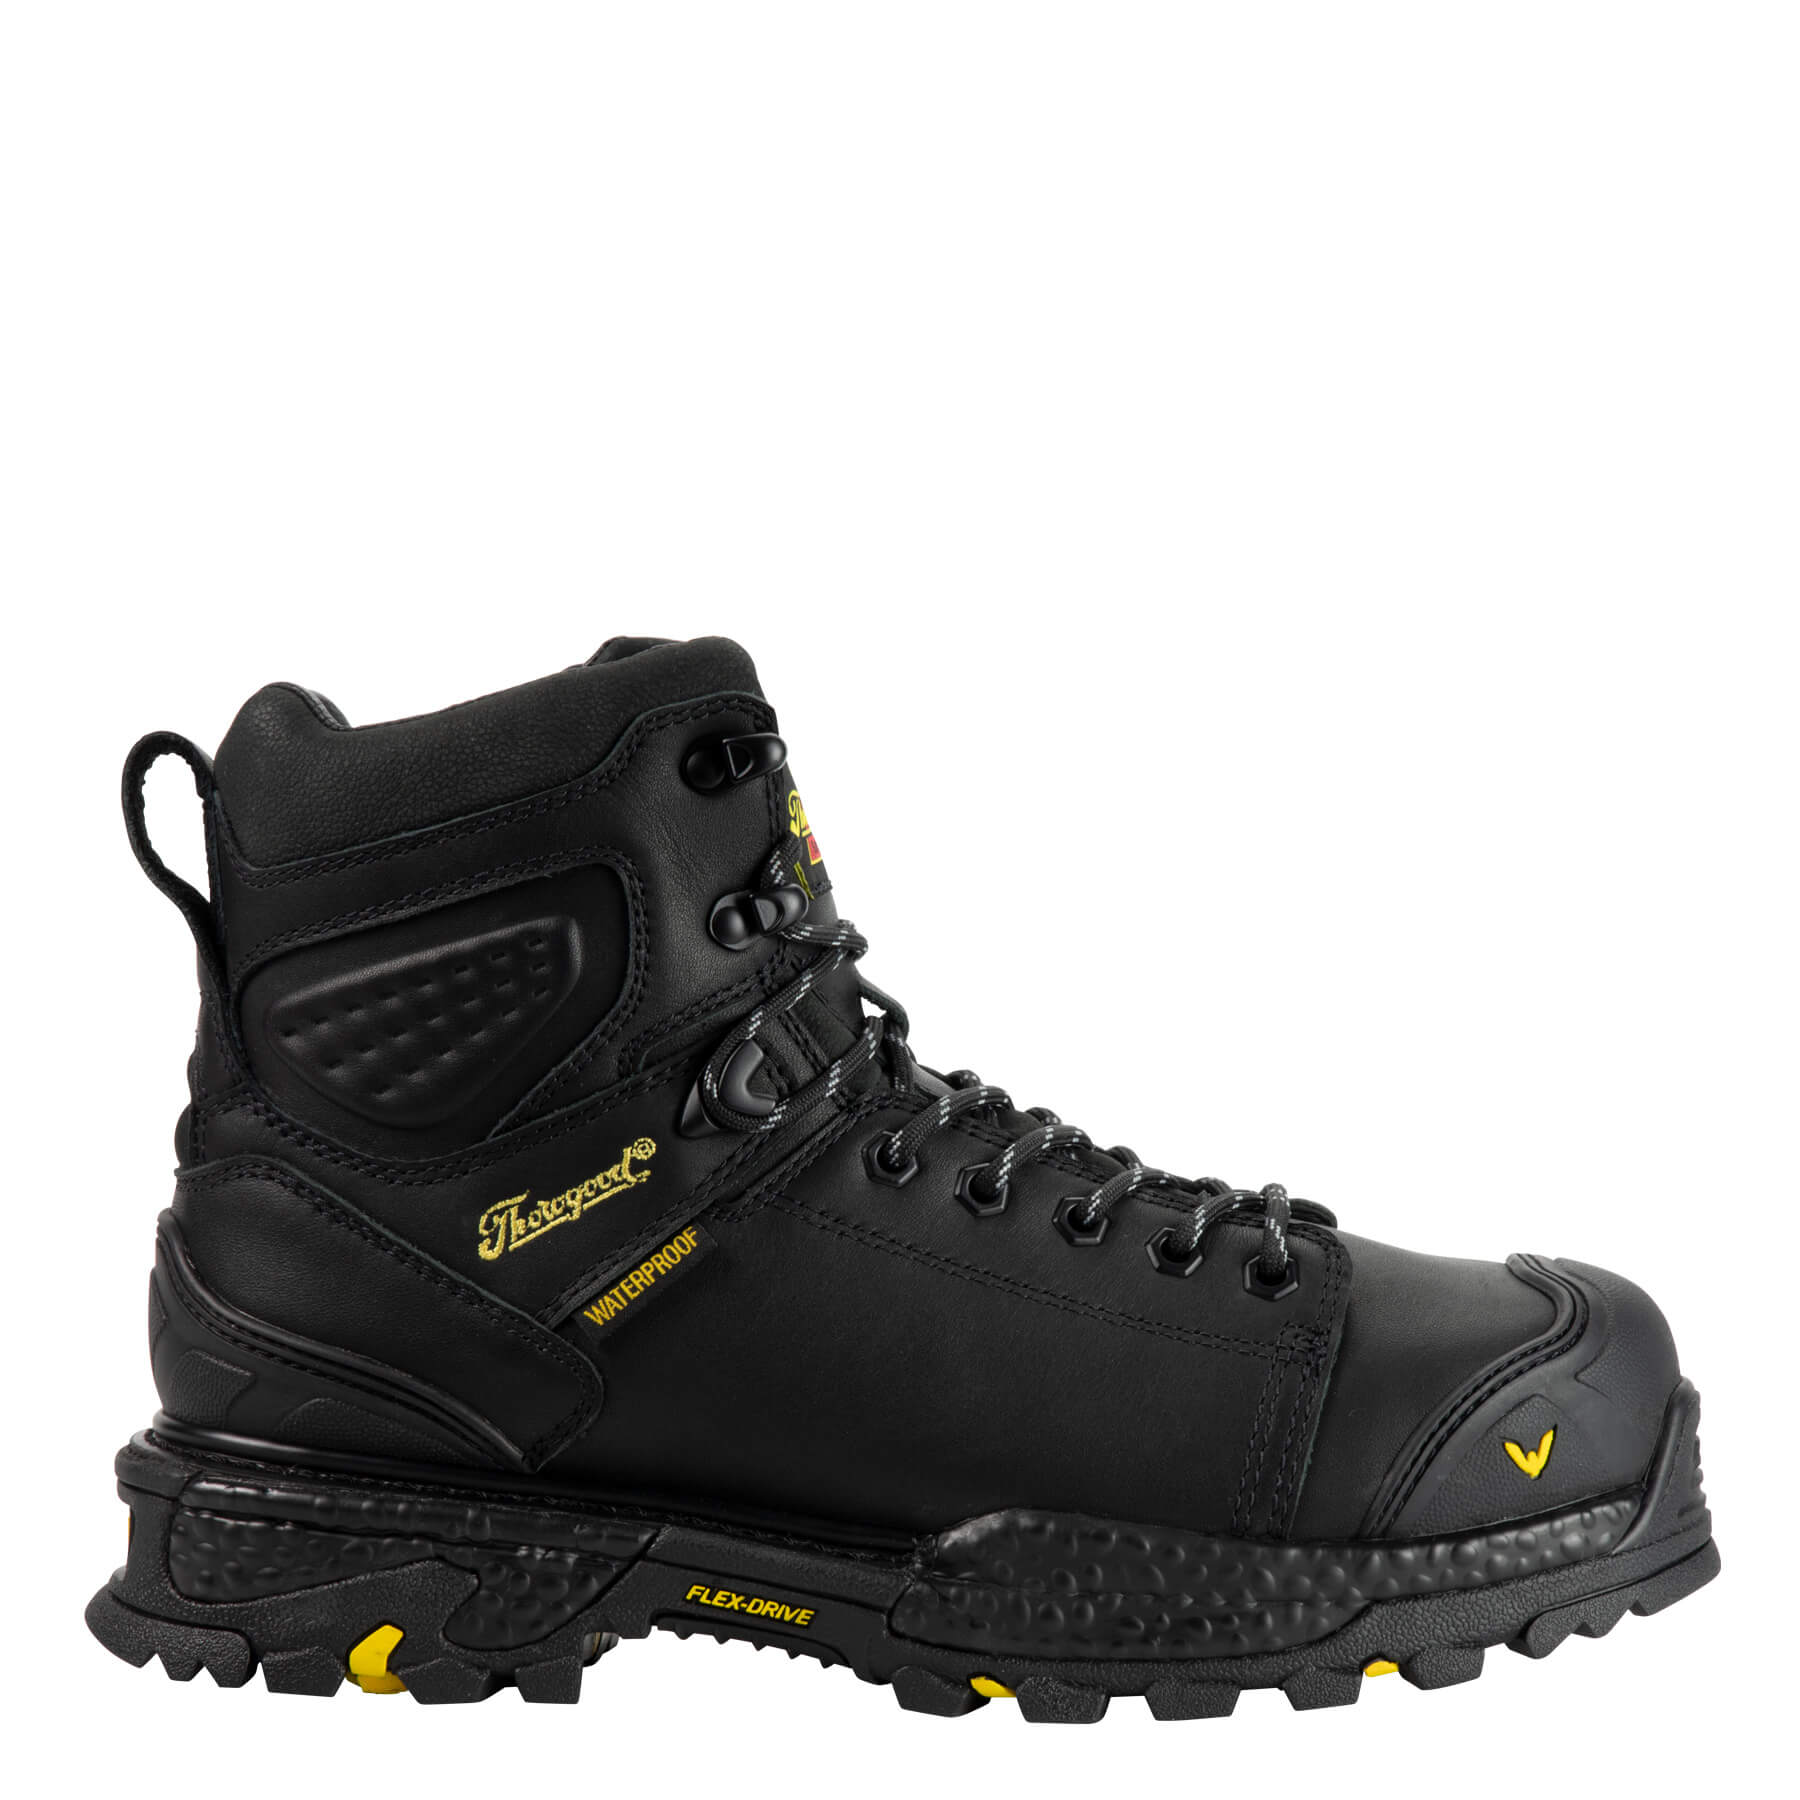 Thorogood Infinity FD Series 6 Inch Black Waterproof Safety Toe Boots from Columbia Safety